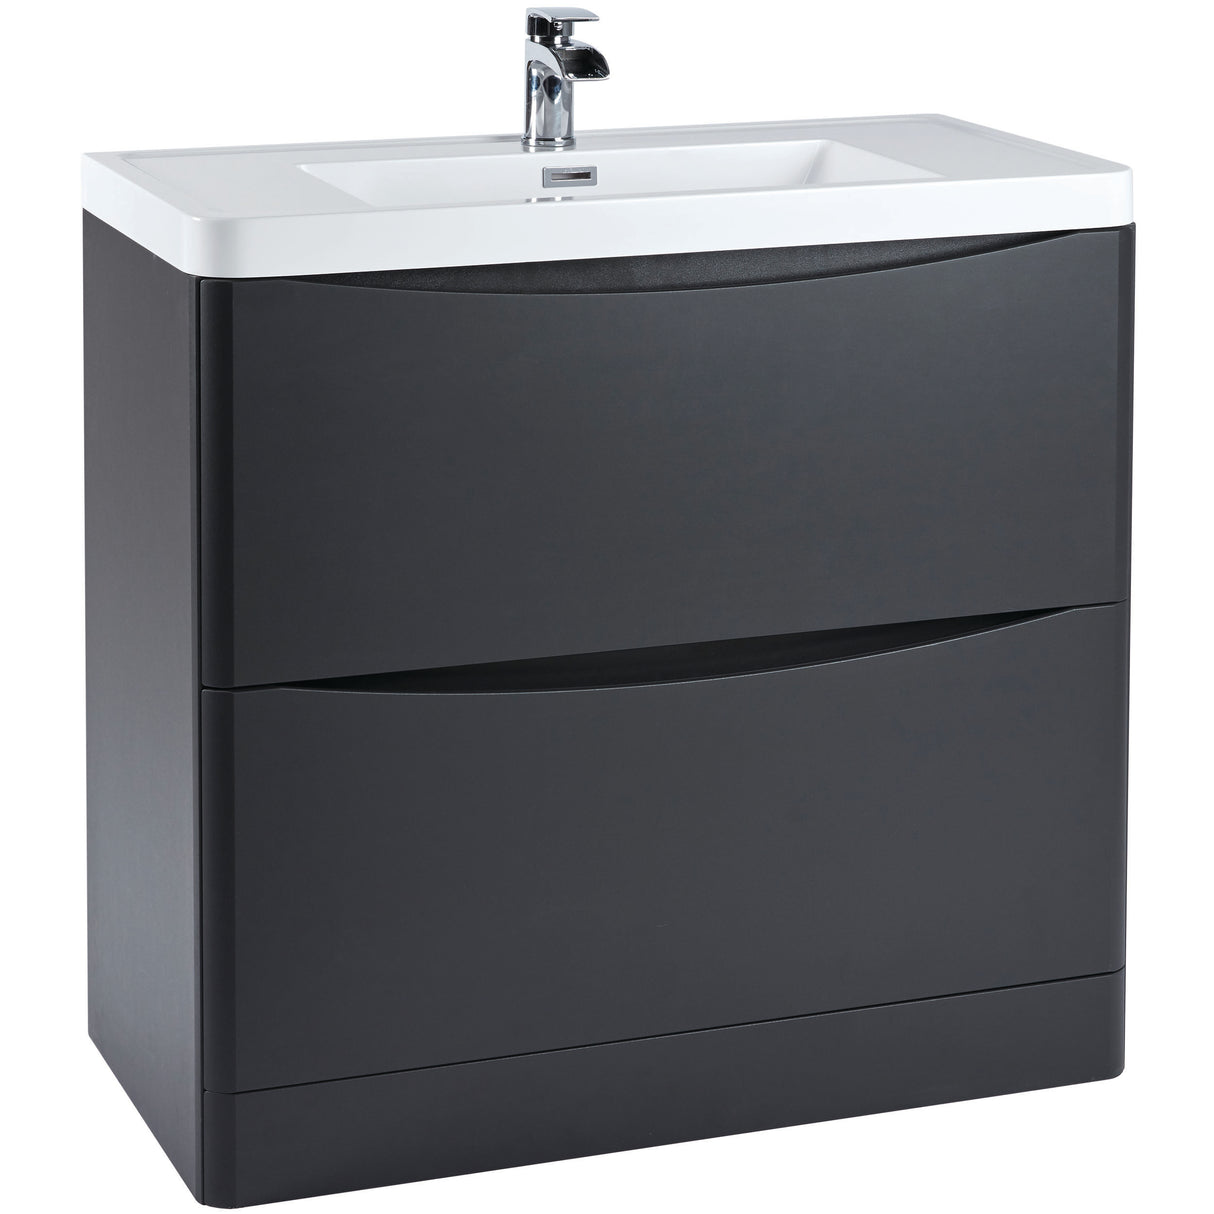 Floor Standing Vanity Unit 900mm With Basin Or Counter Top - 2 Colours !